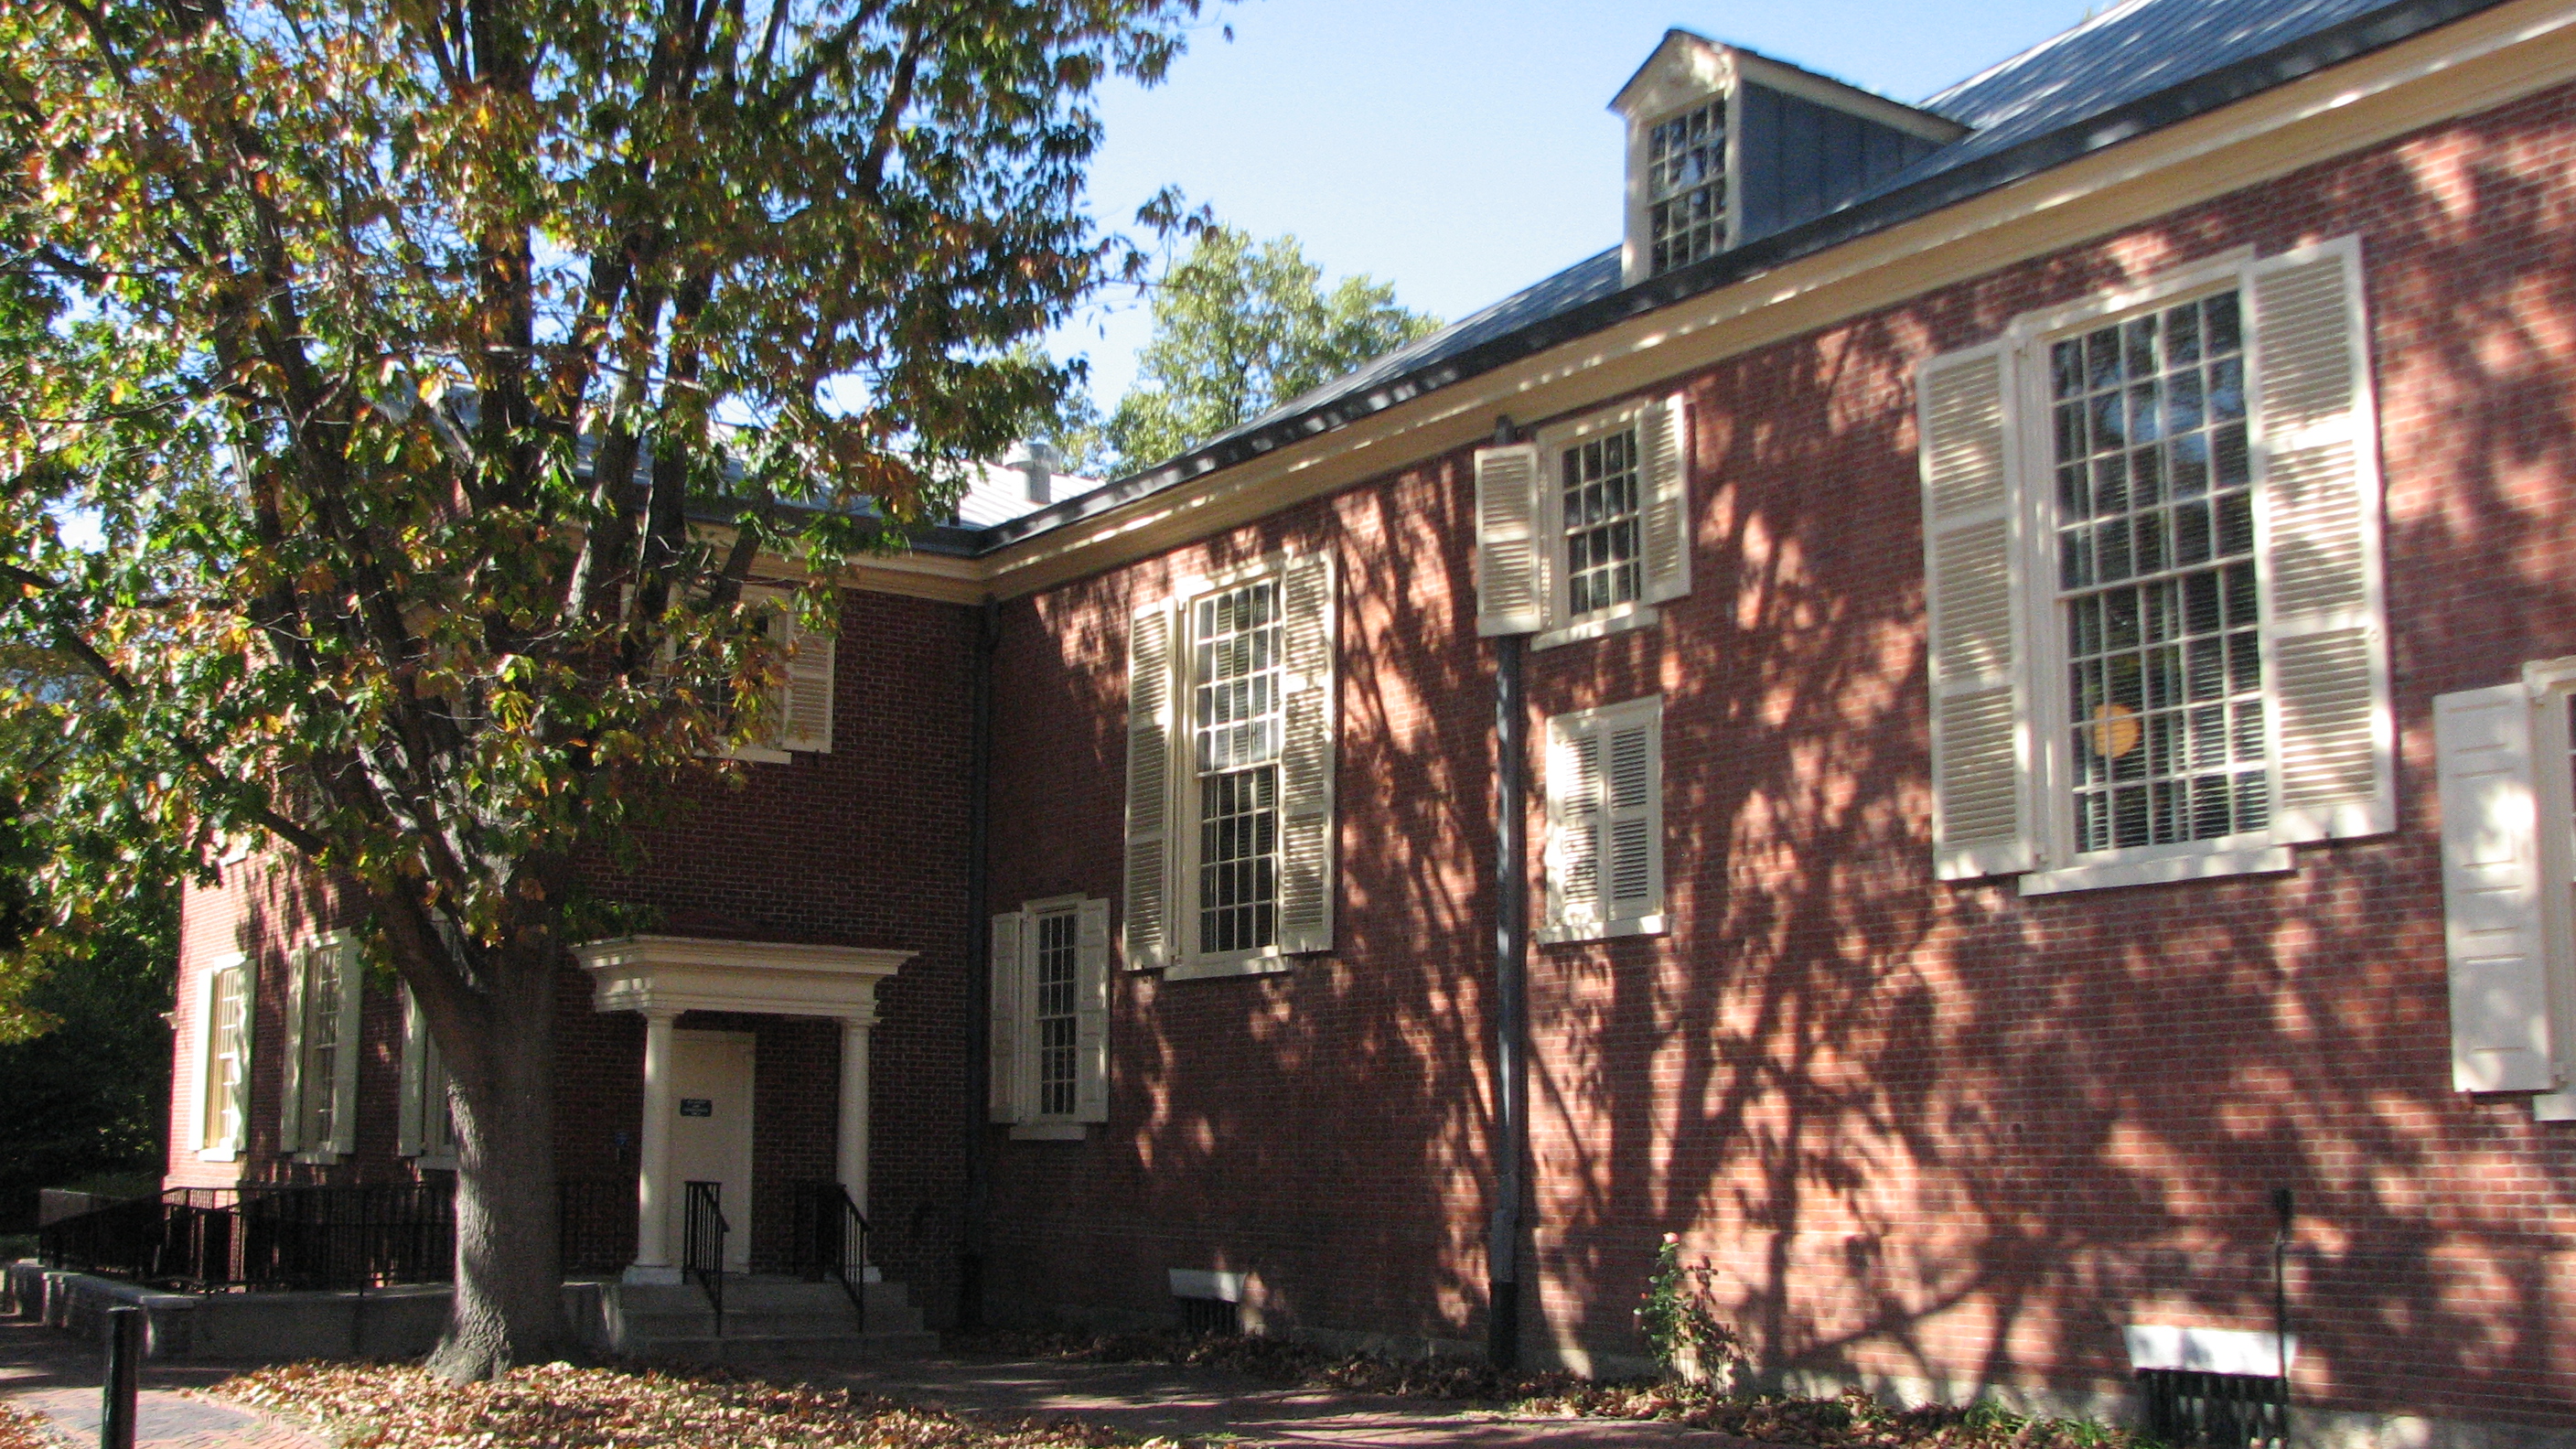 The rear of the Meeting House on the south side.